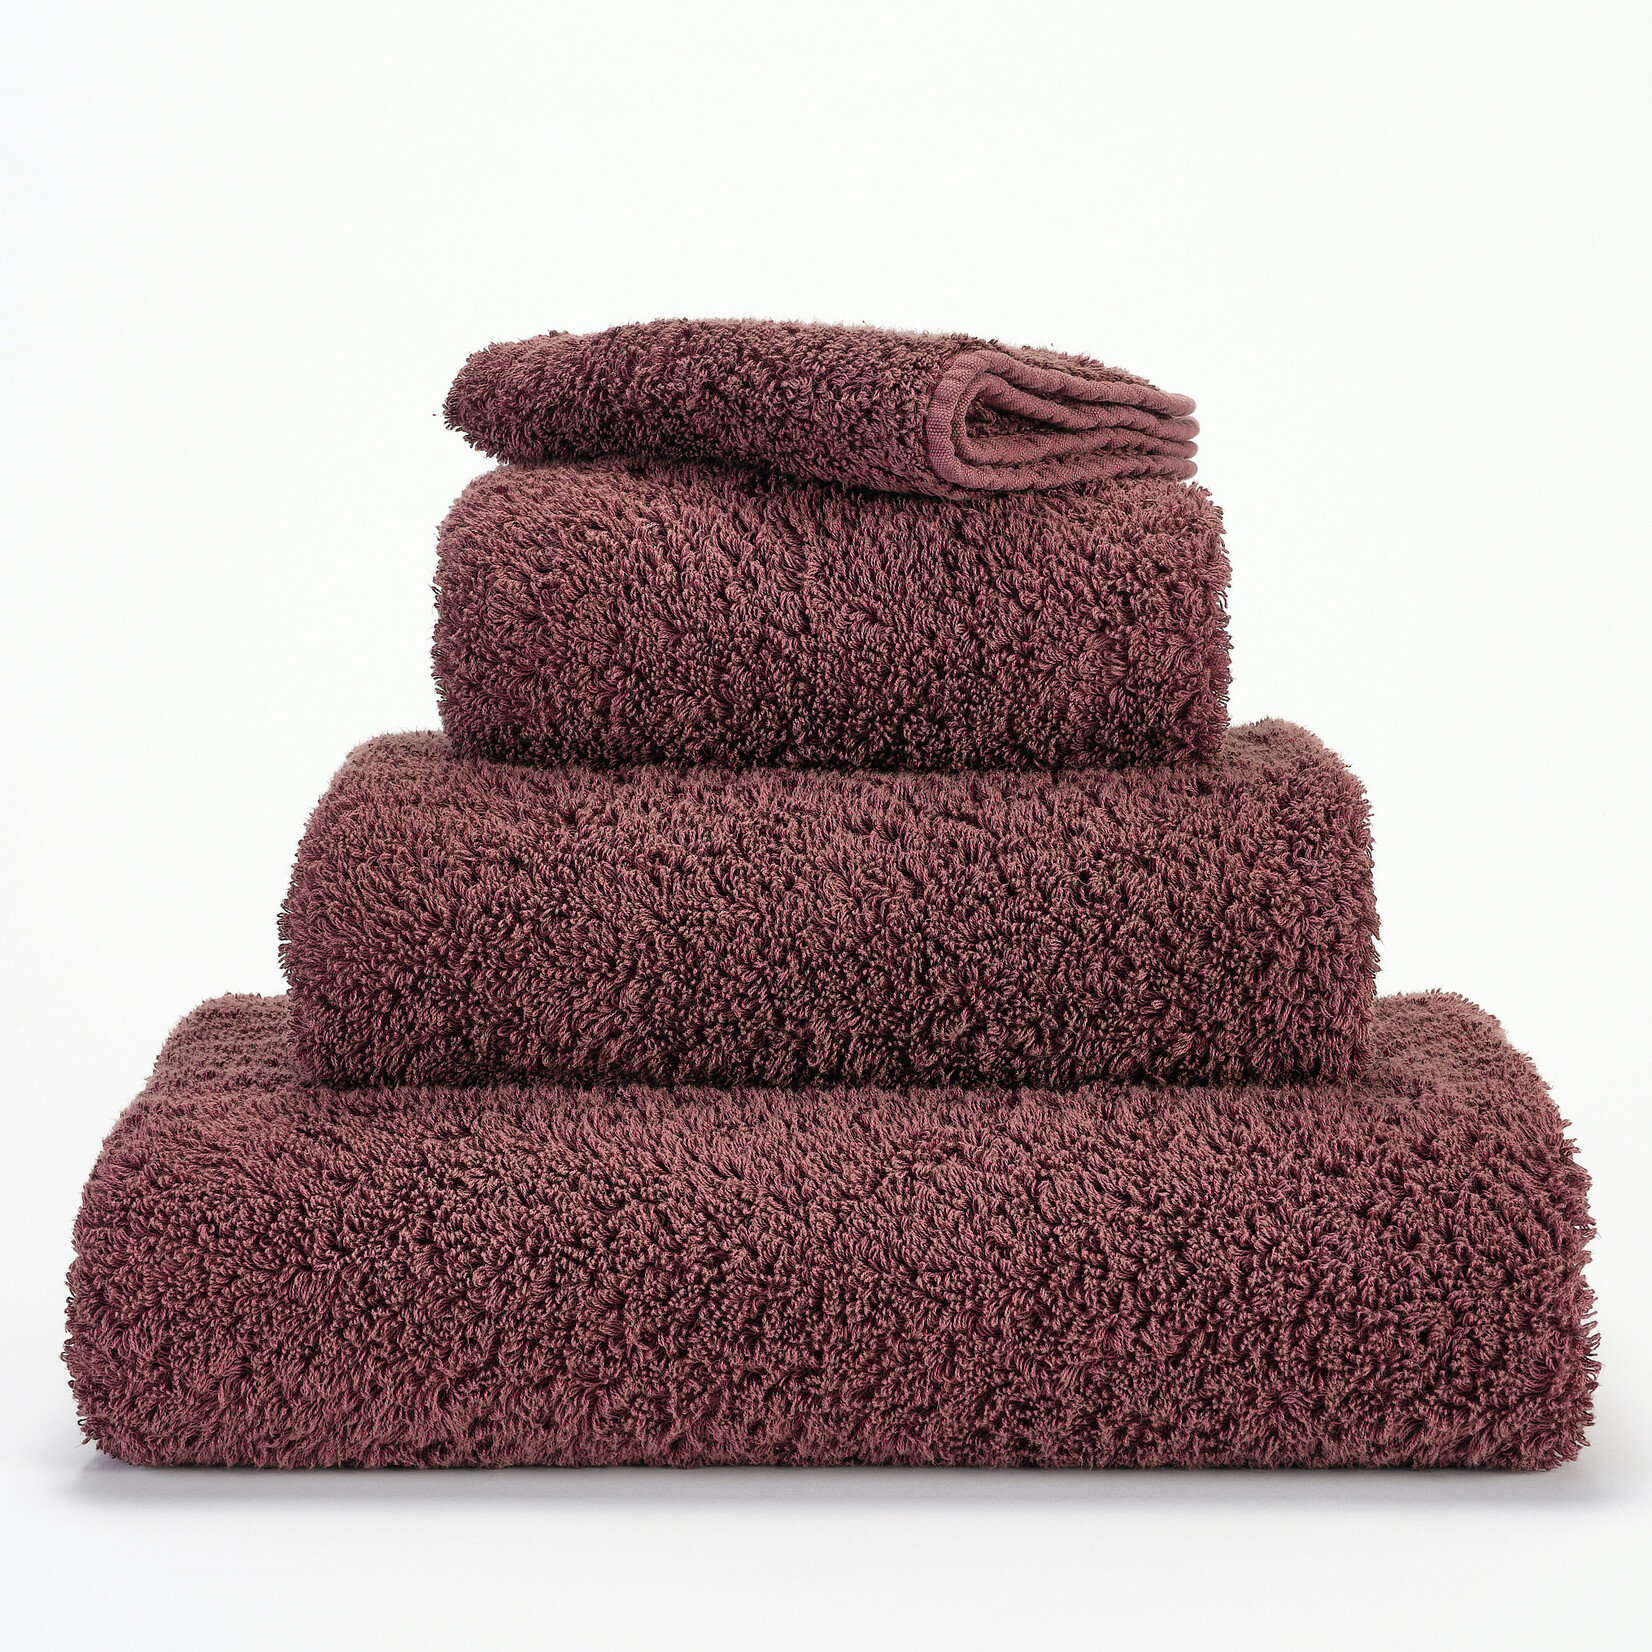 Abyss Abyss Super Pile Towels 509 Vineyard